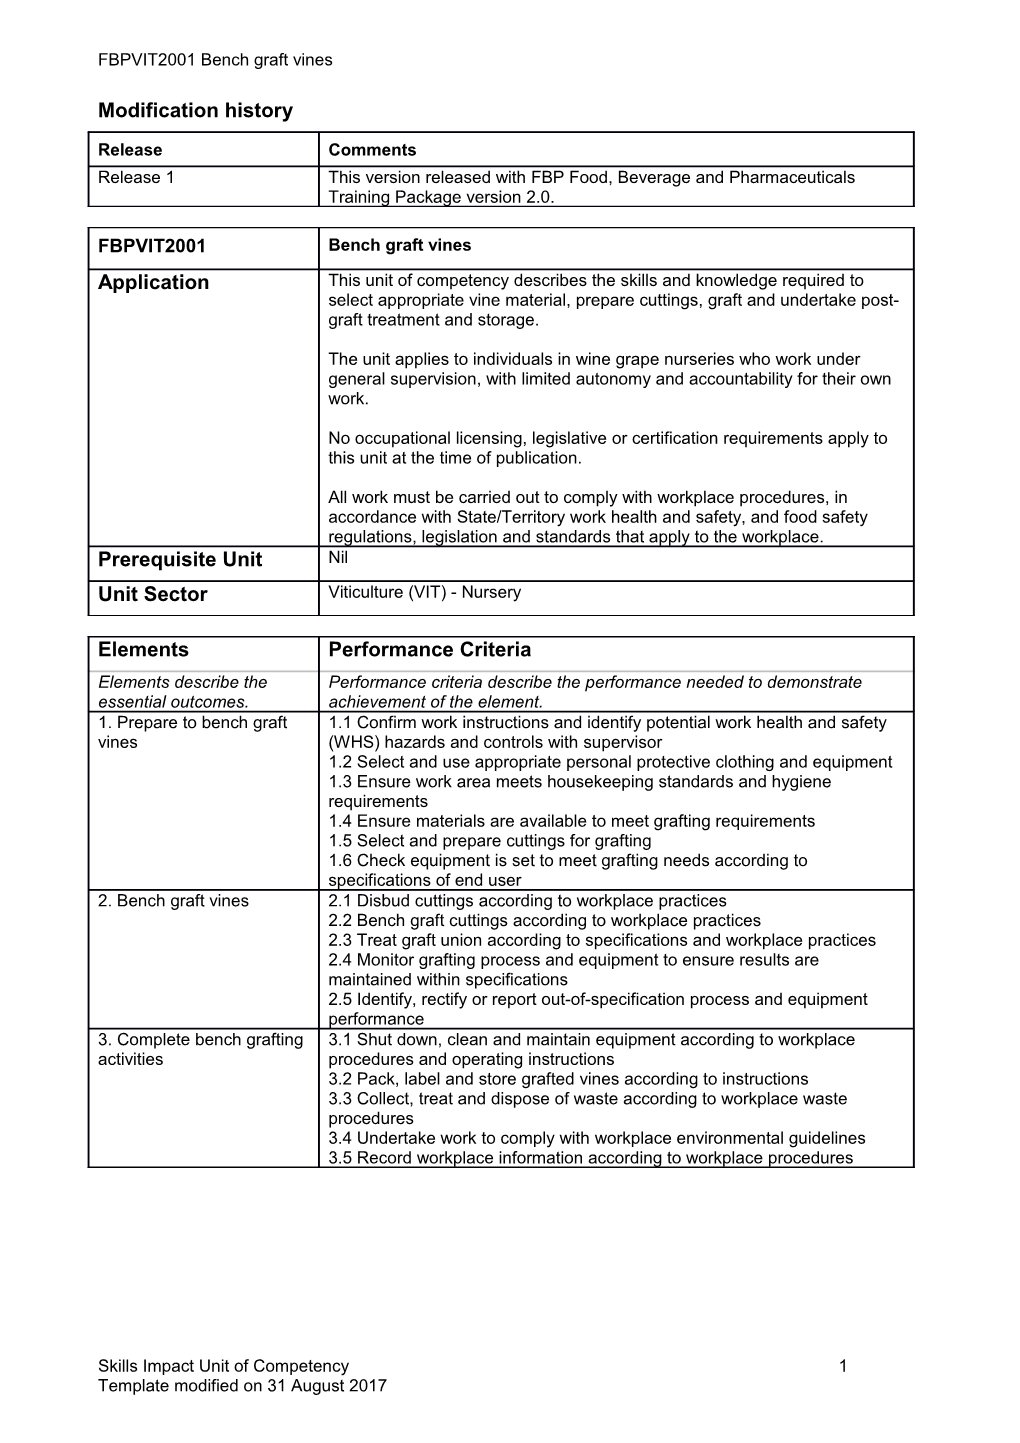 Skills Impact Unit of Competency Template s8